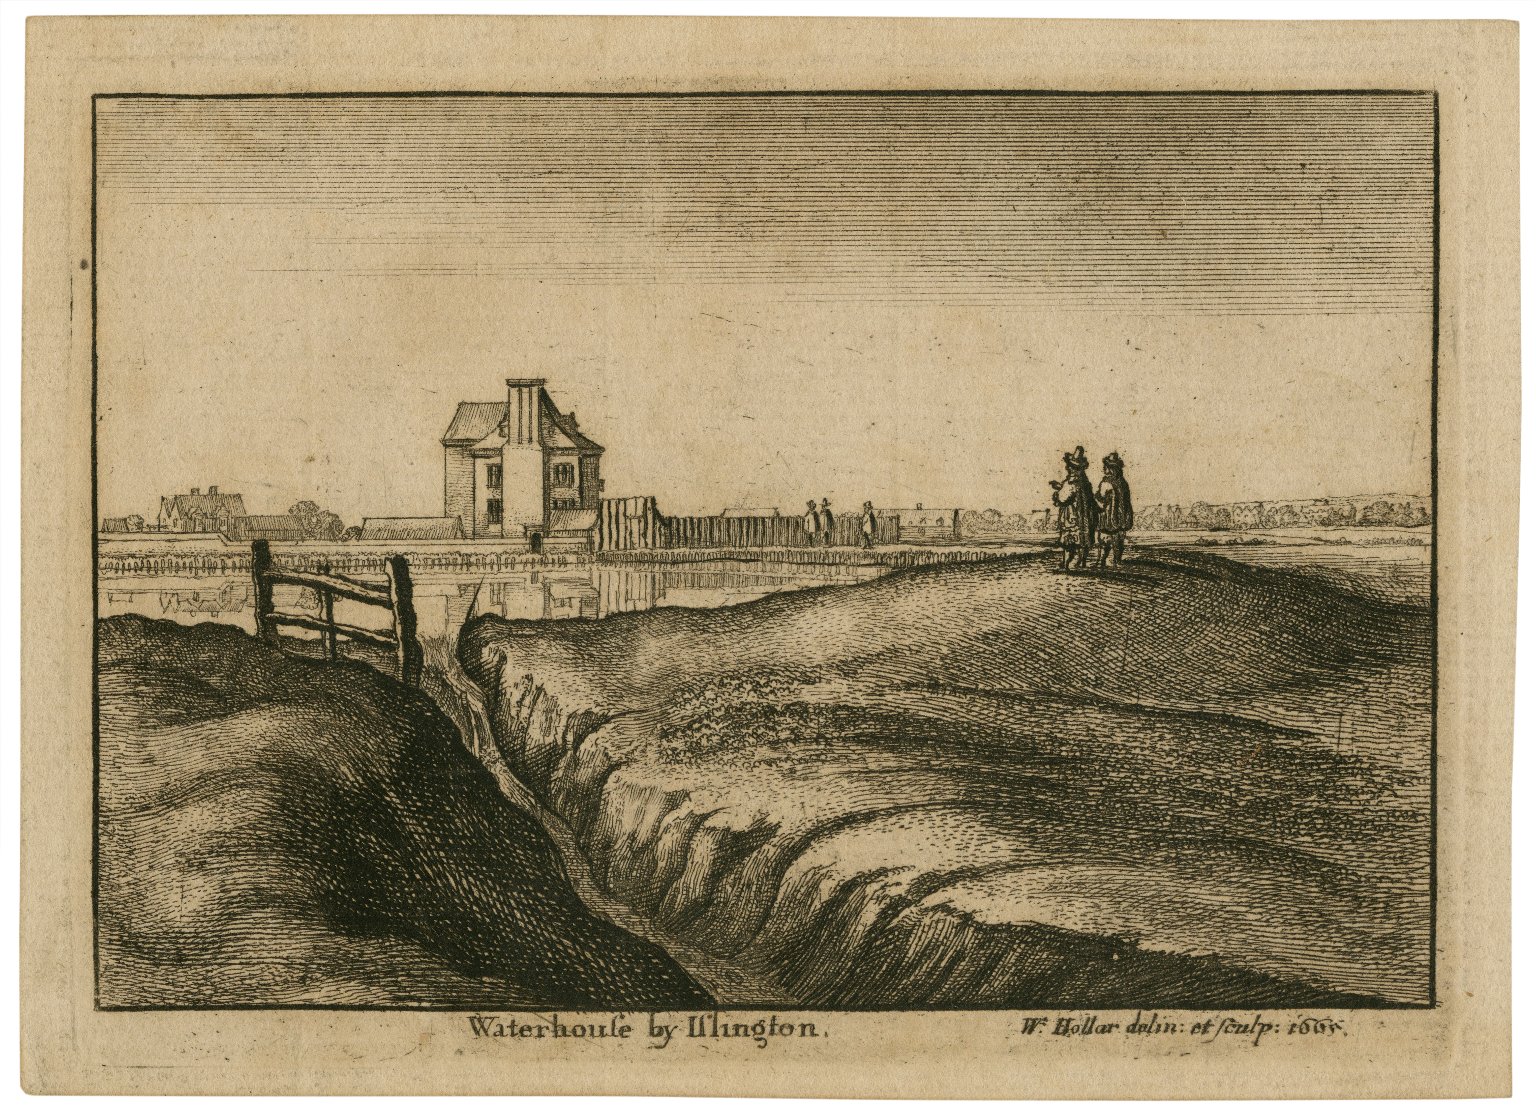 Engraving of Islington, including a water house, by Wenceslaus Hollar. Image courtesy of the Folger Digital Image Collection.